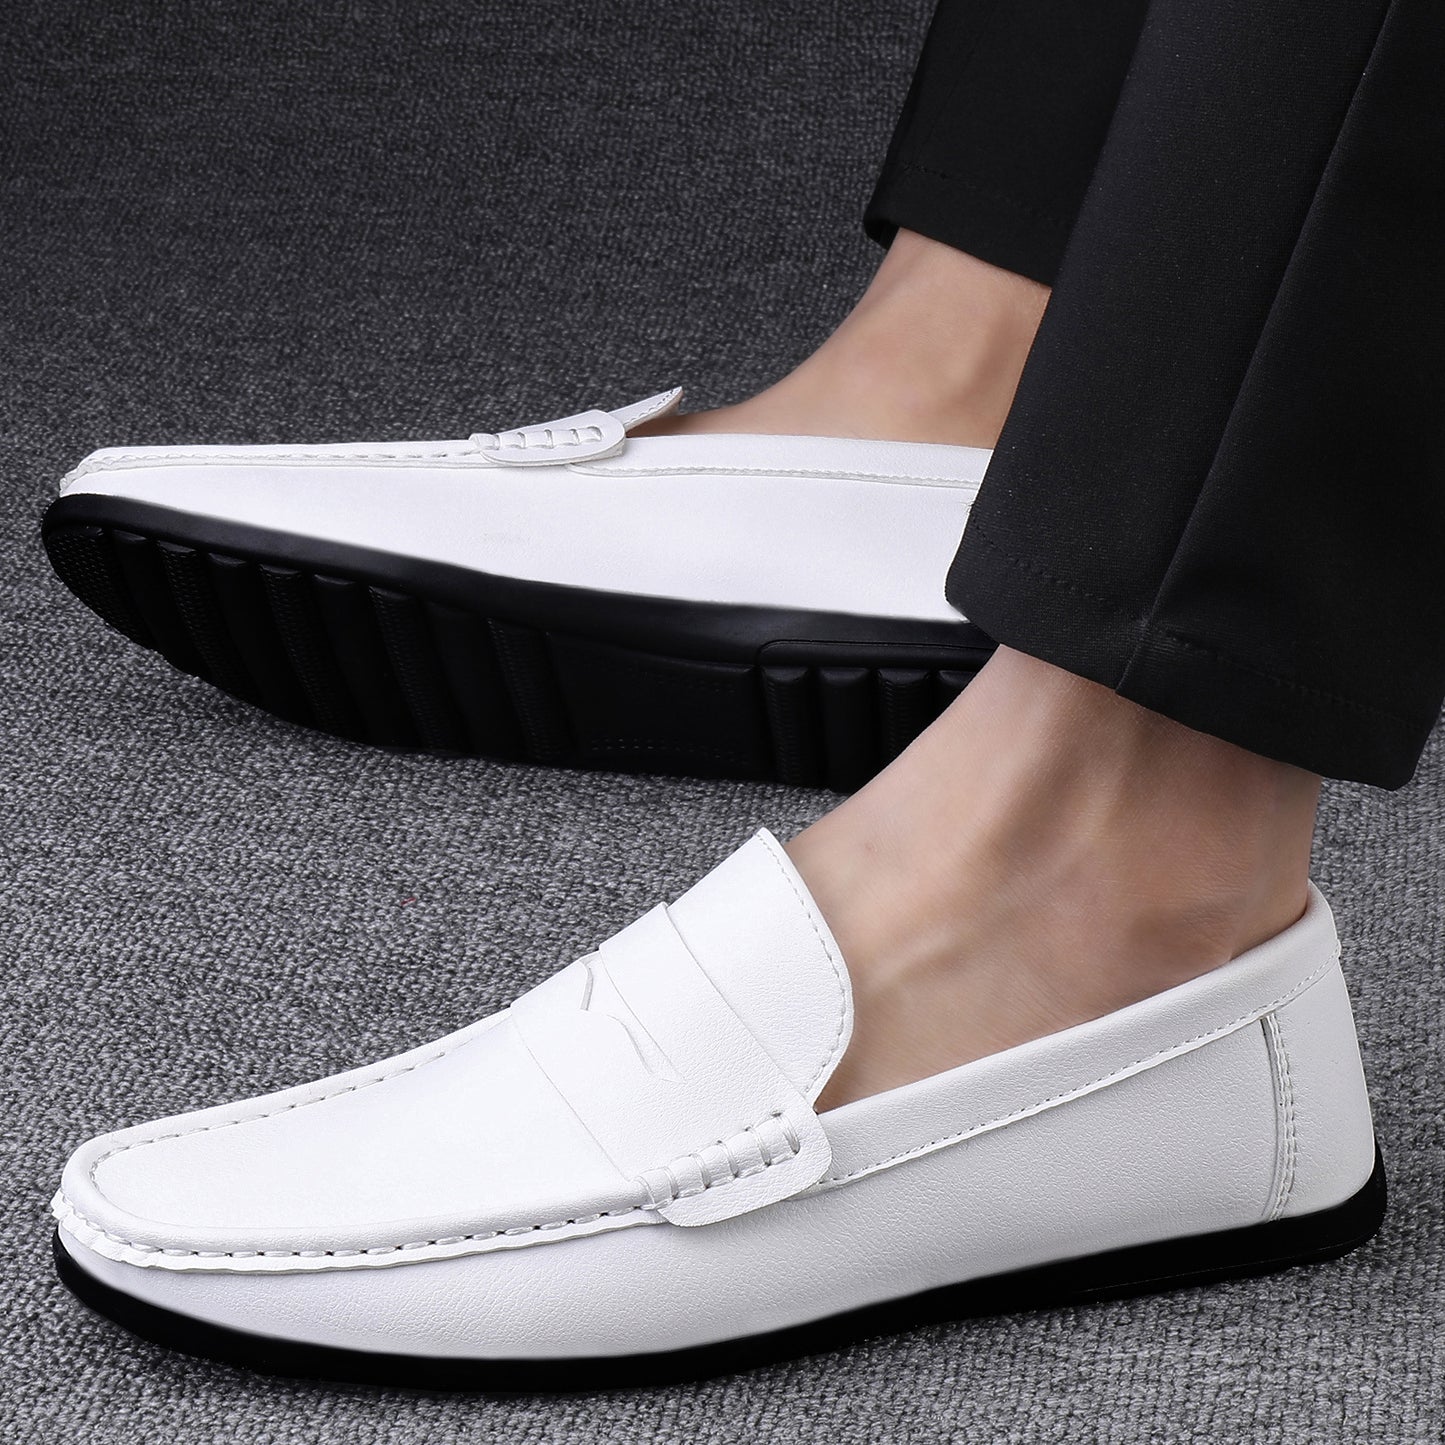 Summer Casual Leather Shoes Driving Flat Fashionable Outdoor Loafers